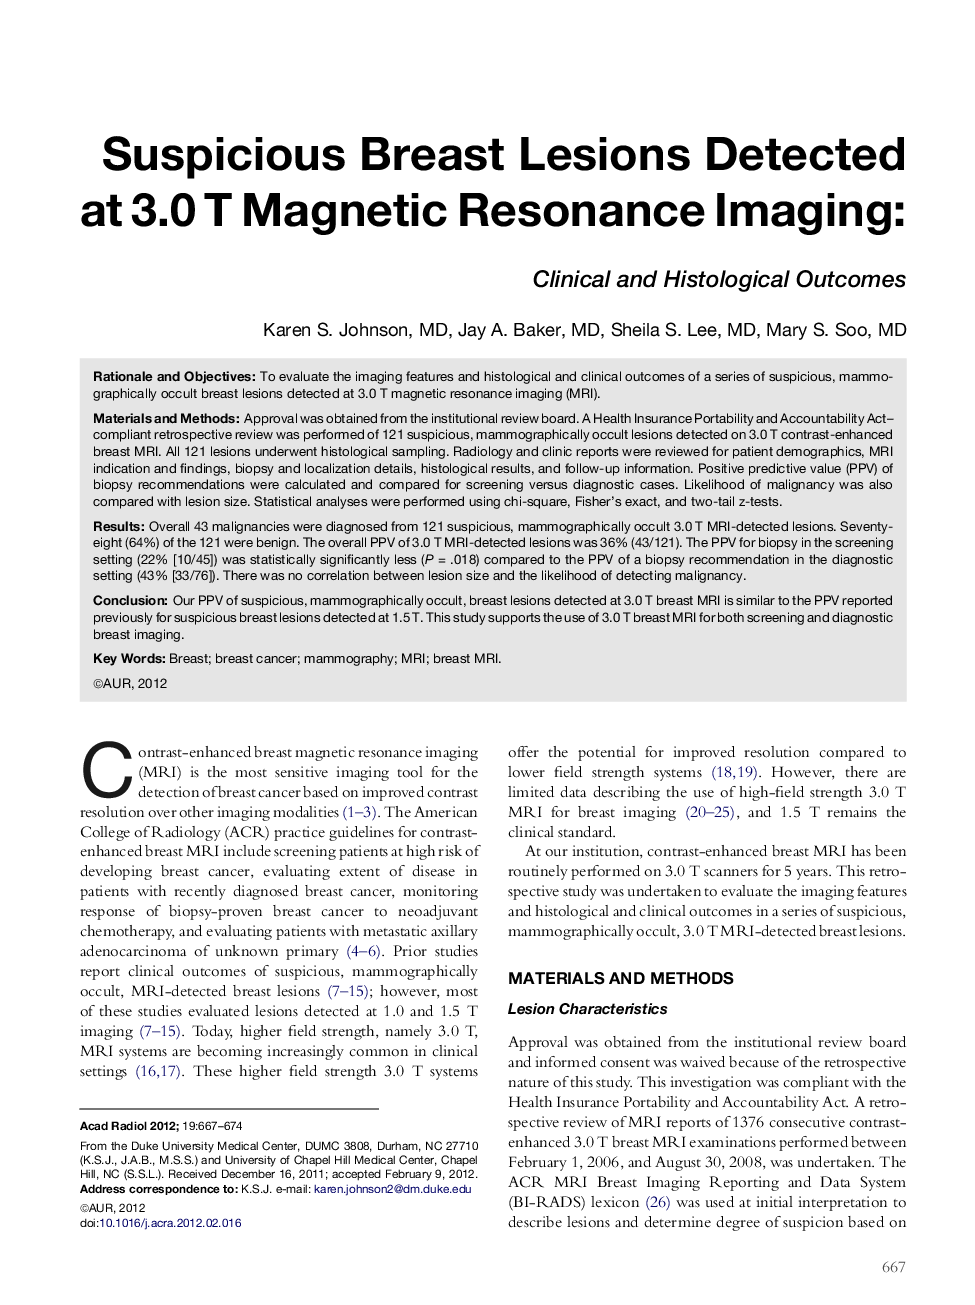 Suspicious Breast Lesions Detected at 3.0 T Magnetic Resonance Imaging